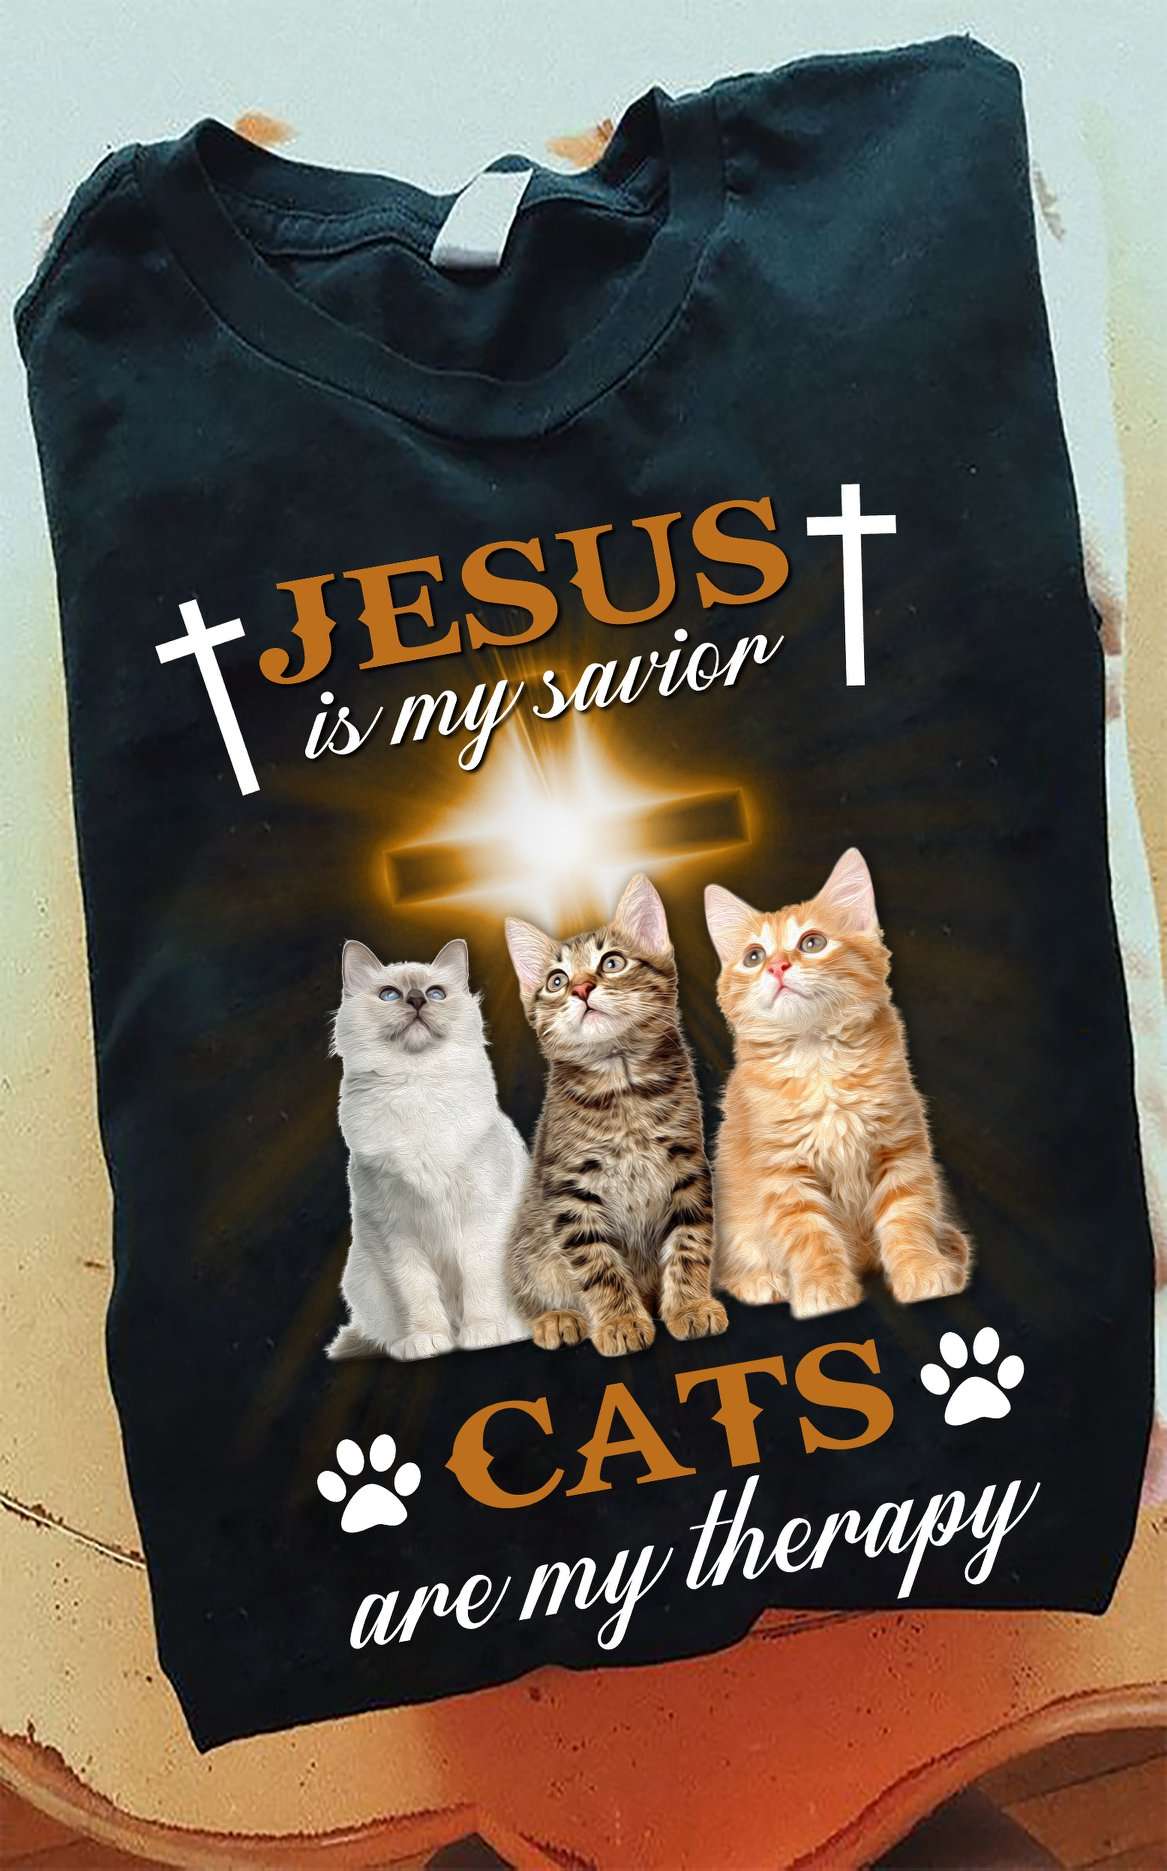 Cat God's Cross - Jesus is my savior cats are my therapy